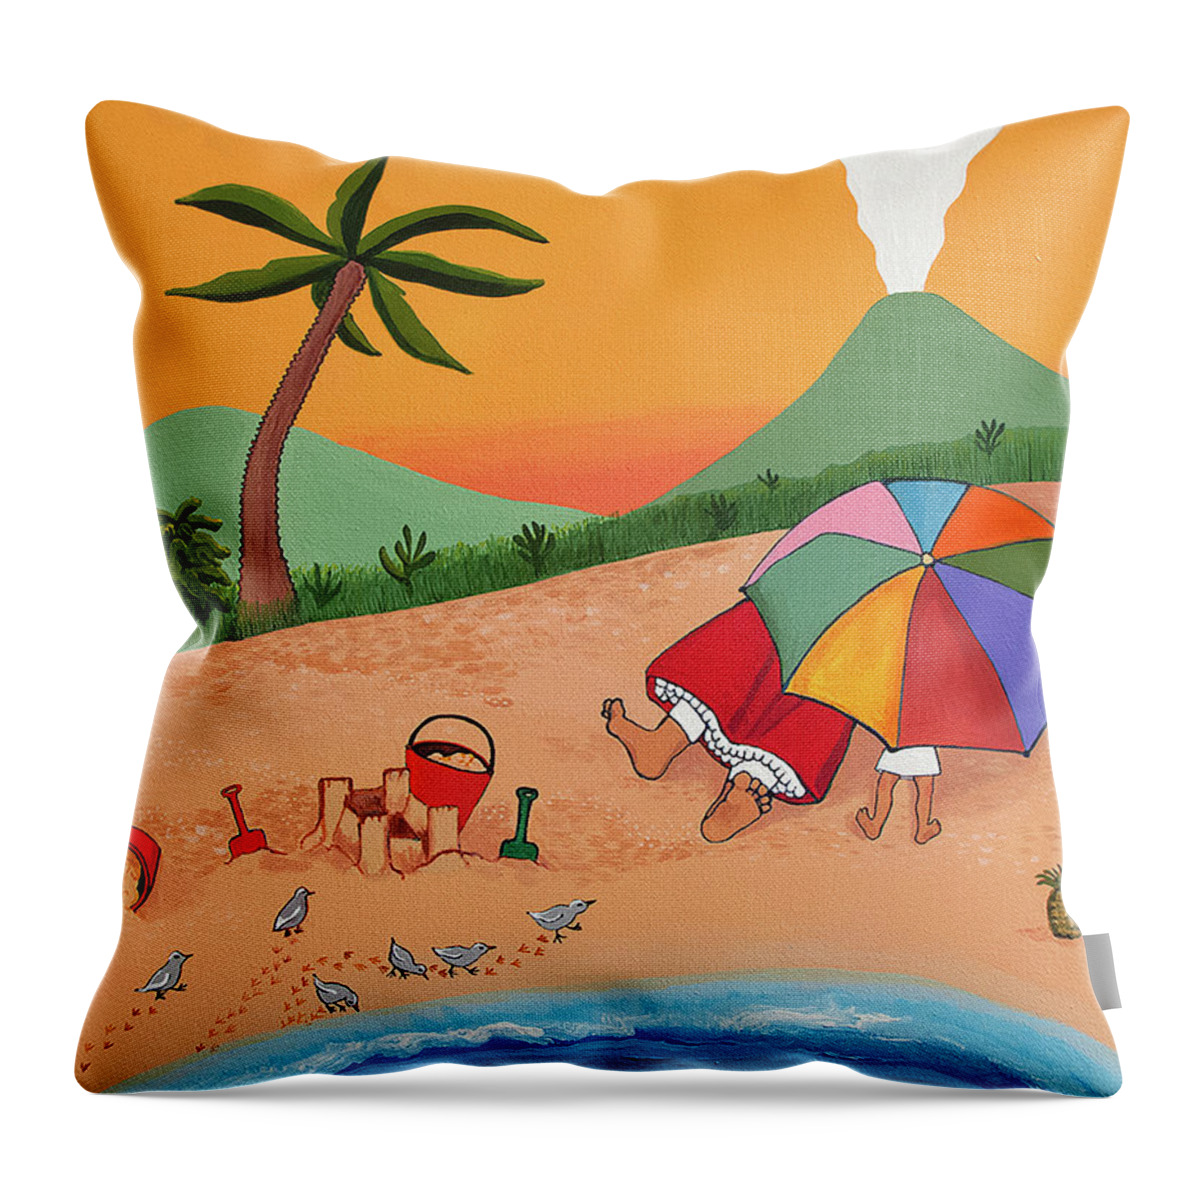 Art For Children Throw Pillow featuring the painting Grandma Serafina Illustration Page 11 by Lorena Cassady